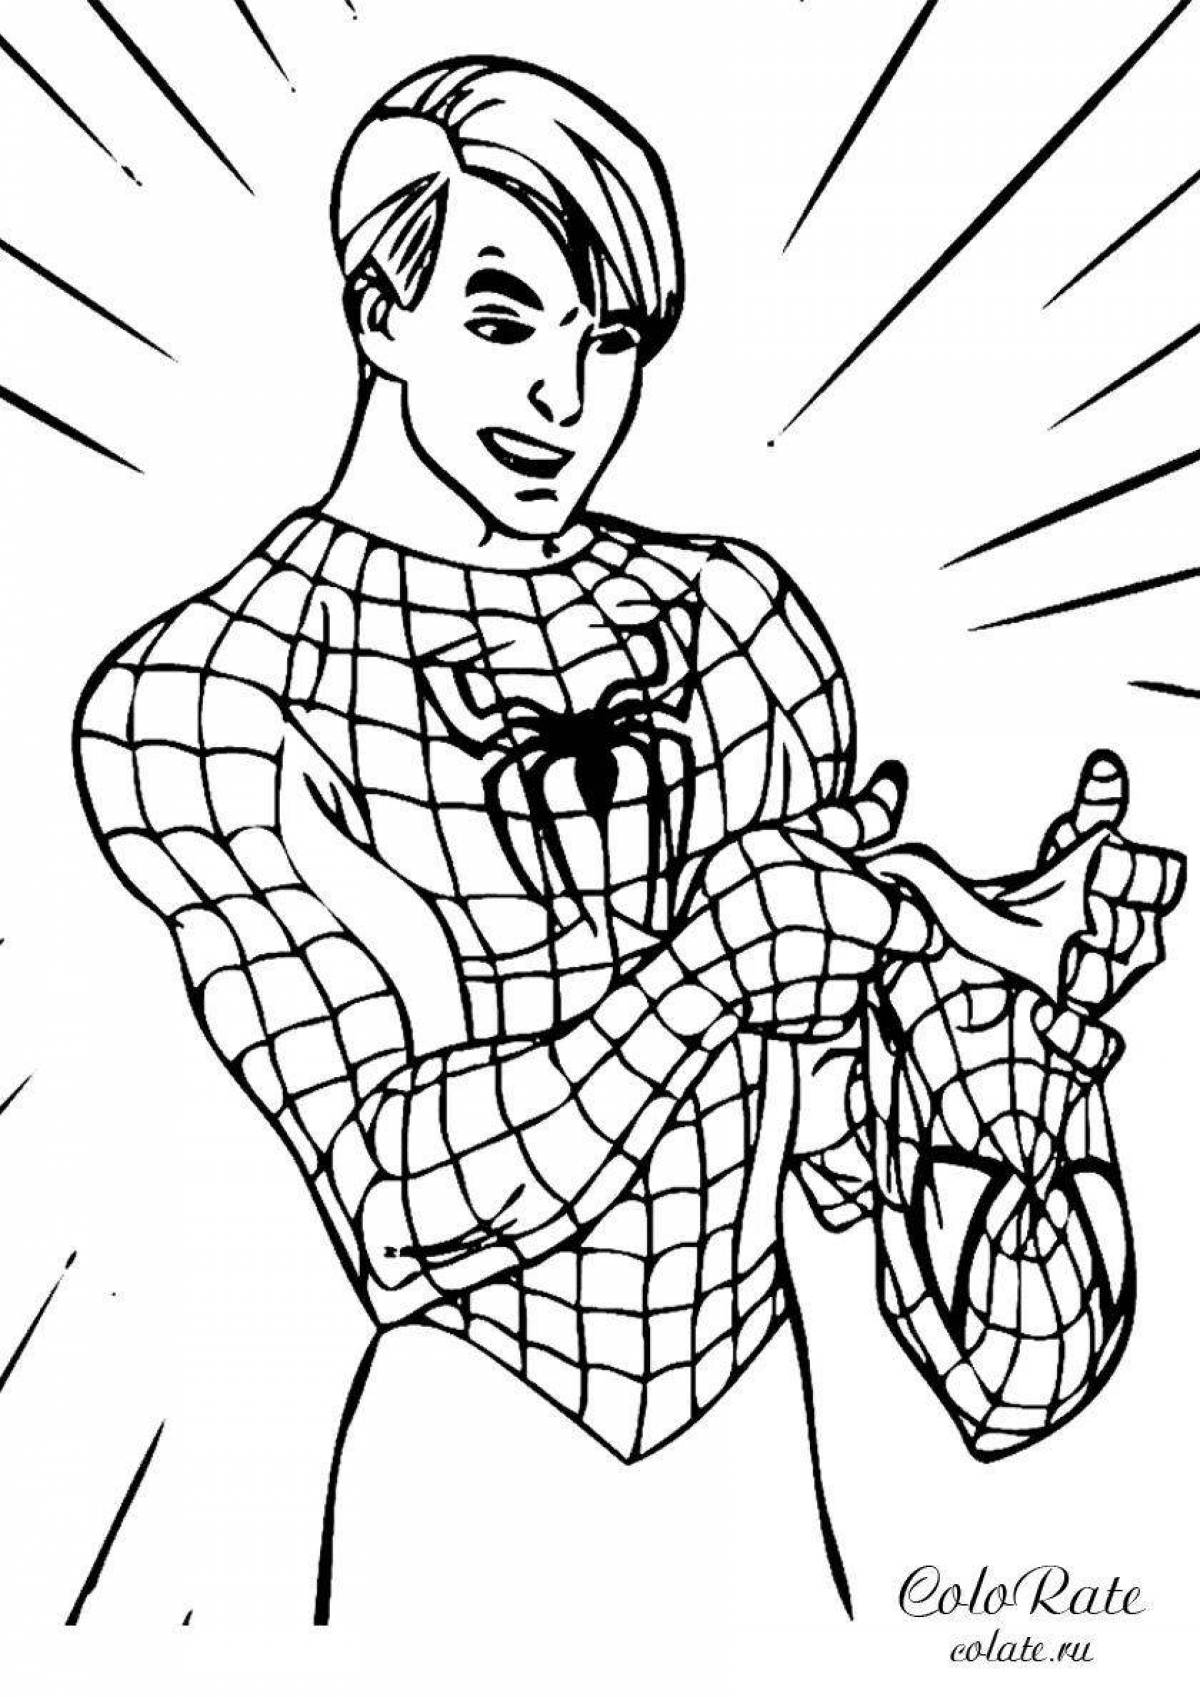 Peter parker's exquisite coloring book